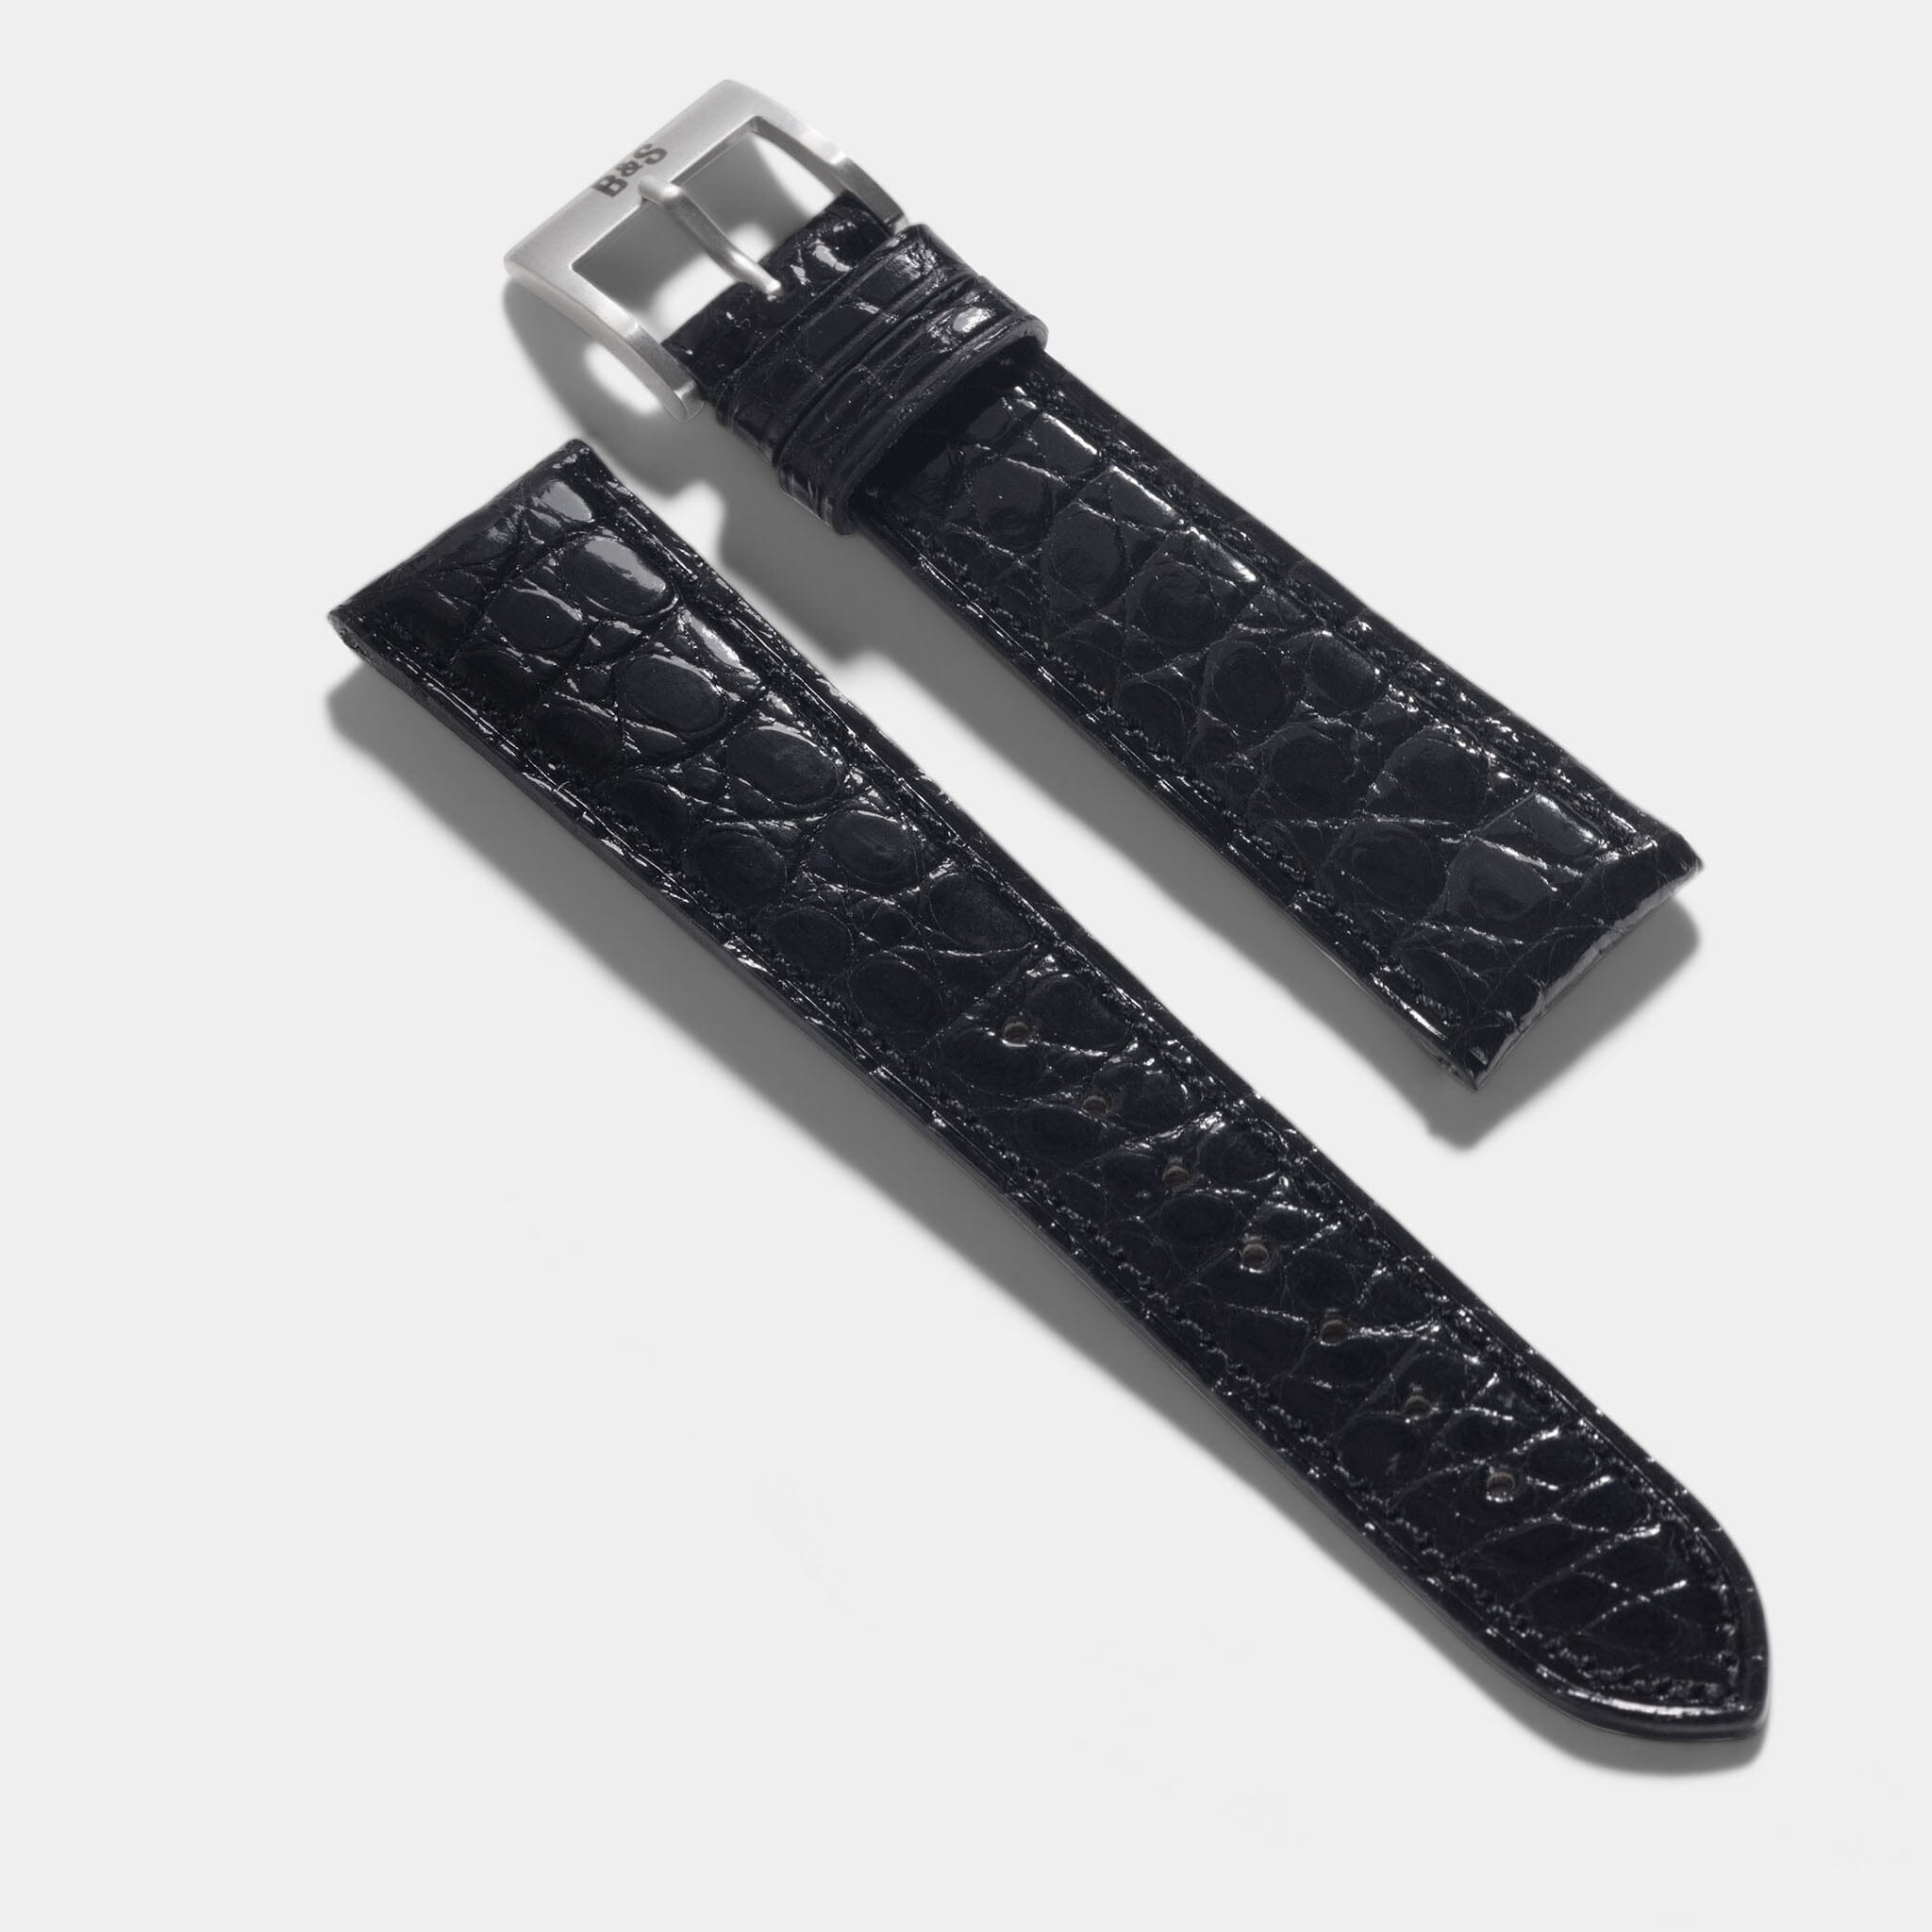 Black Alligator Leather Watch Strap for luxury watches